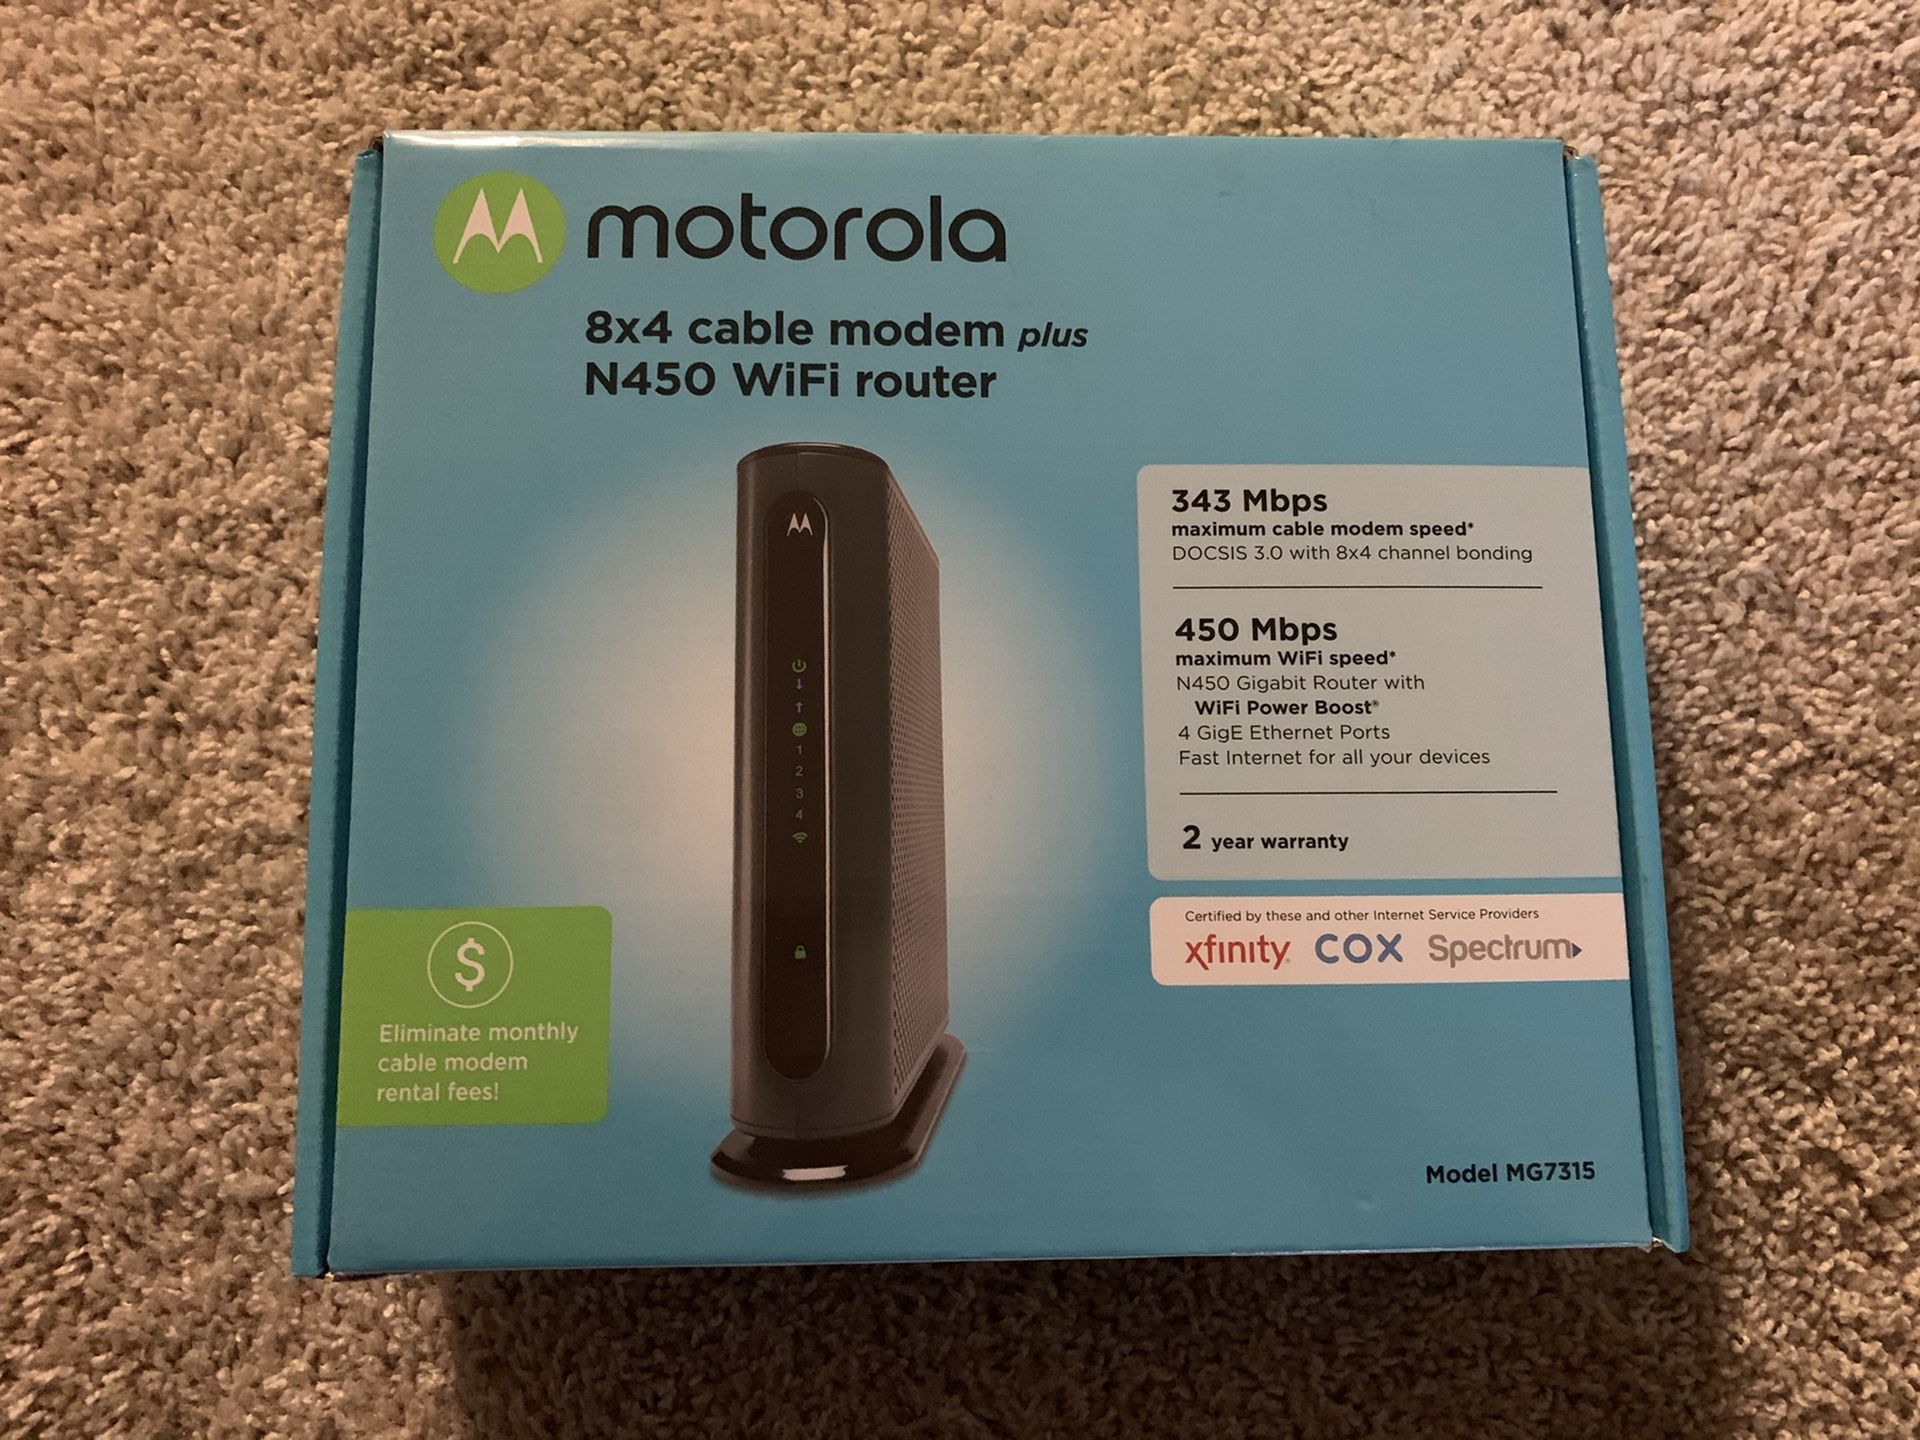 Motorola 8x4 dual cable and WiFi router